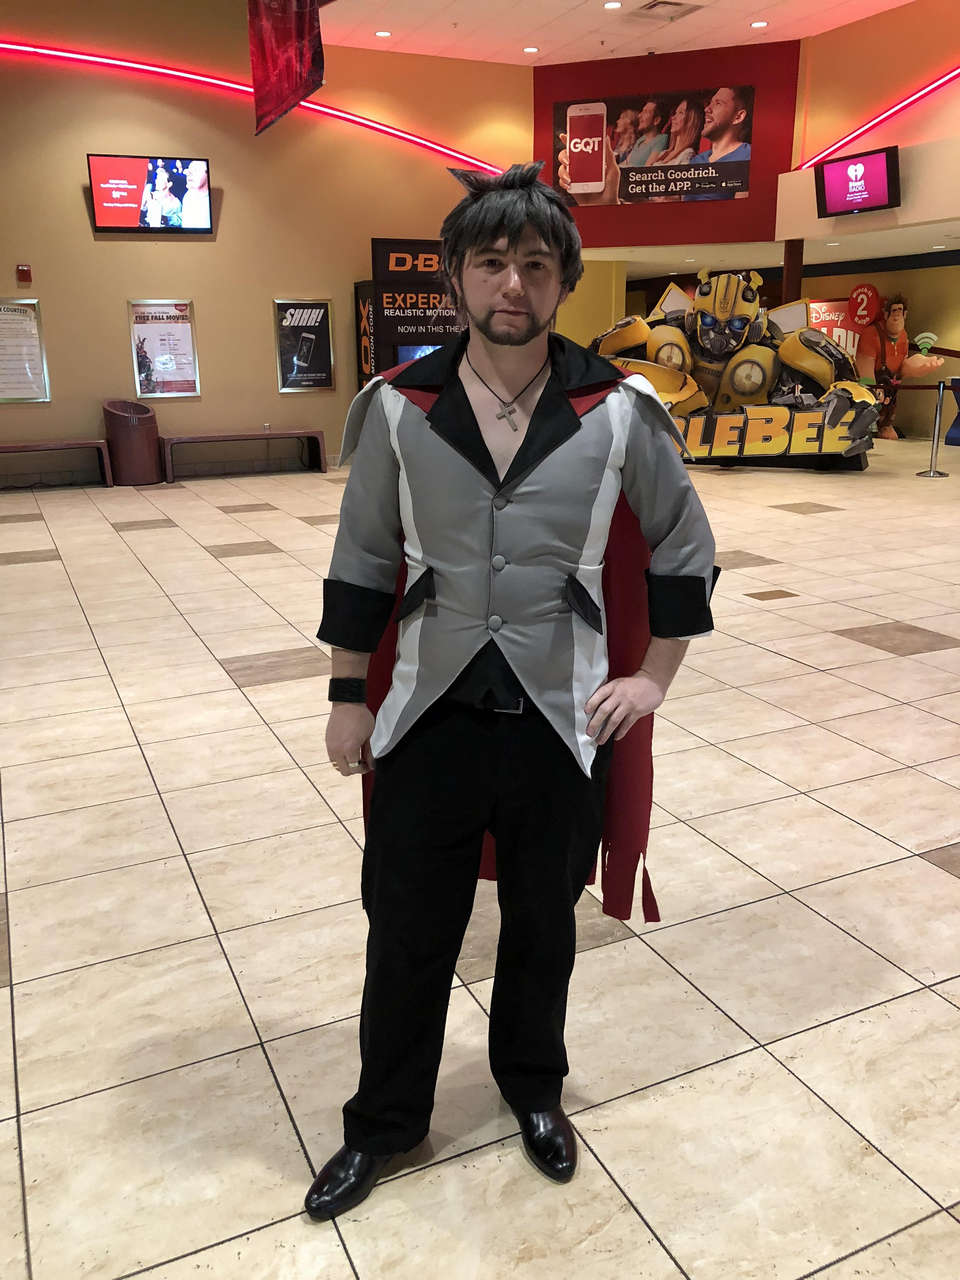 Ran Into This Awesome Qrow Cosplayer At The Premiere For Vol 